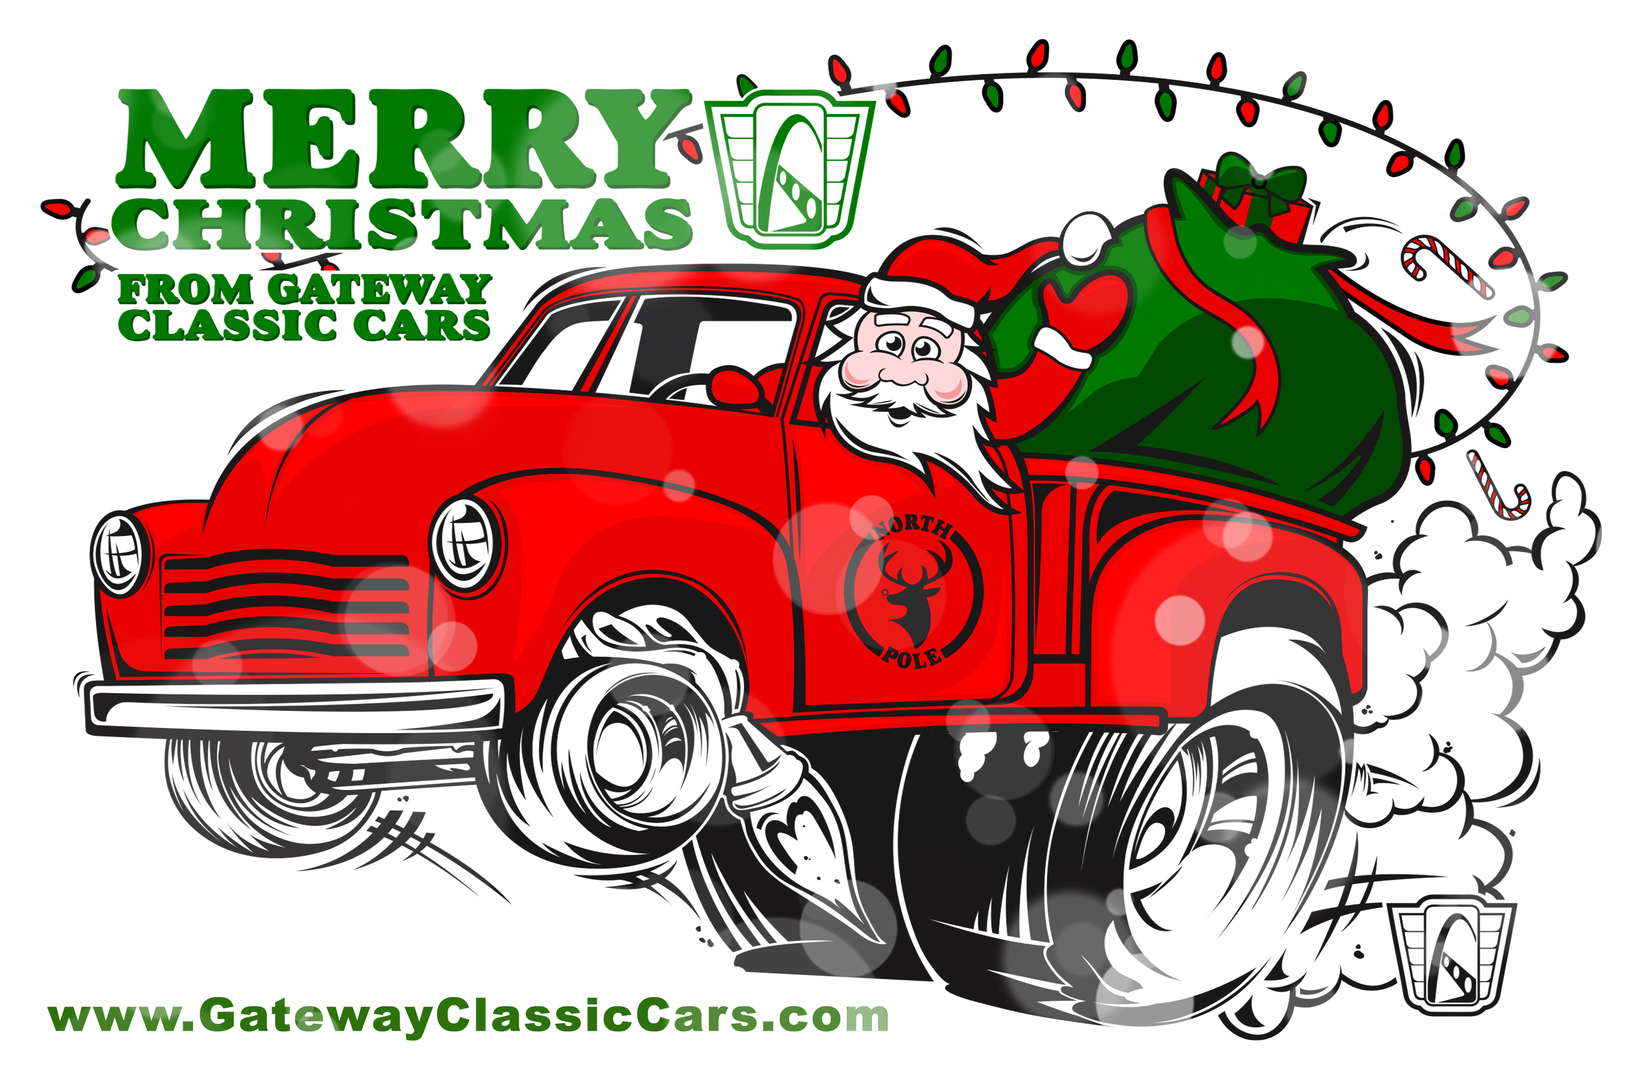 Holiday Party - Gateway Classic Cars of Philadelphia, Gloucester, New Jersey, United States